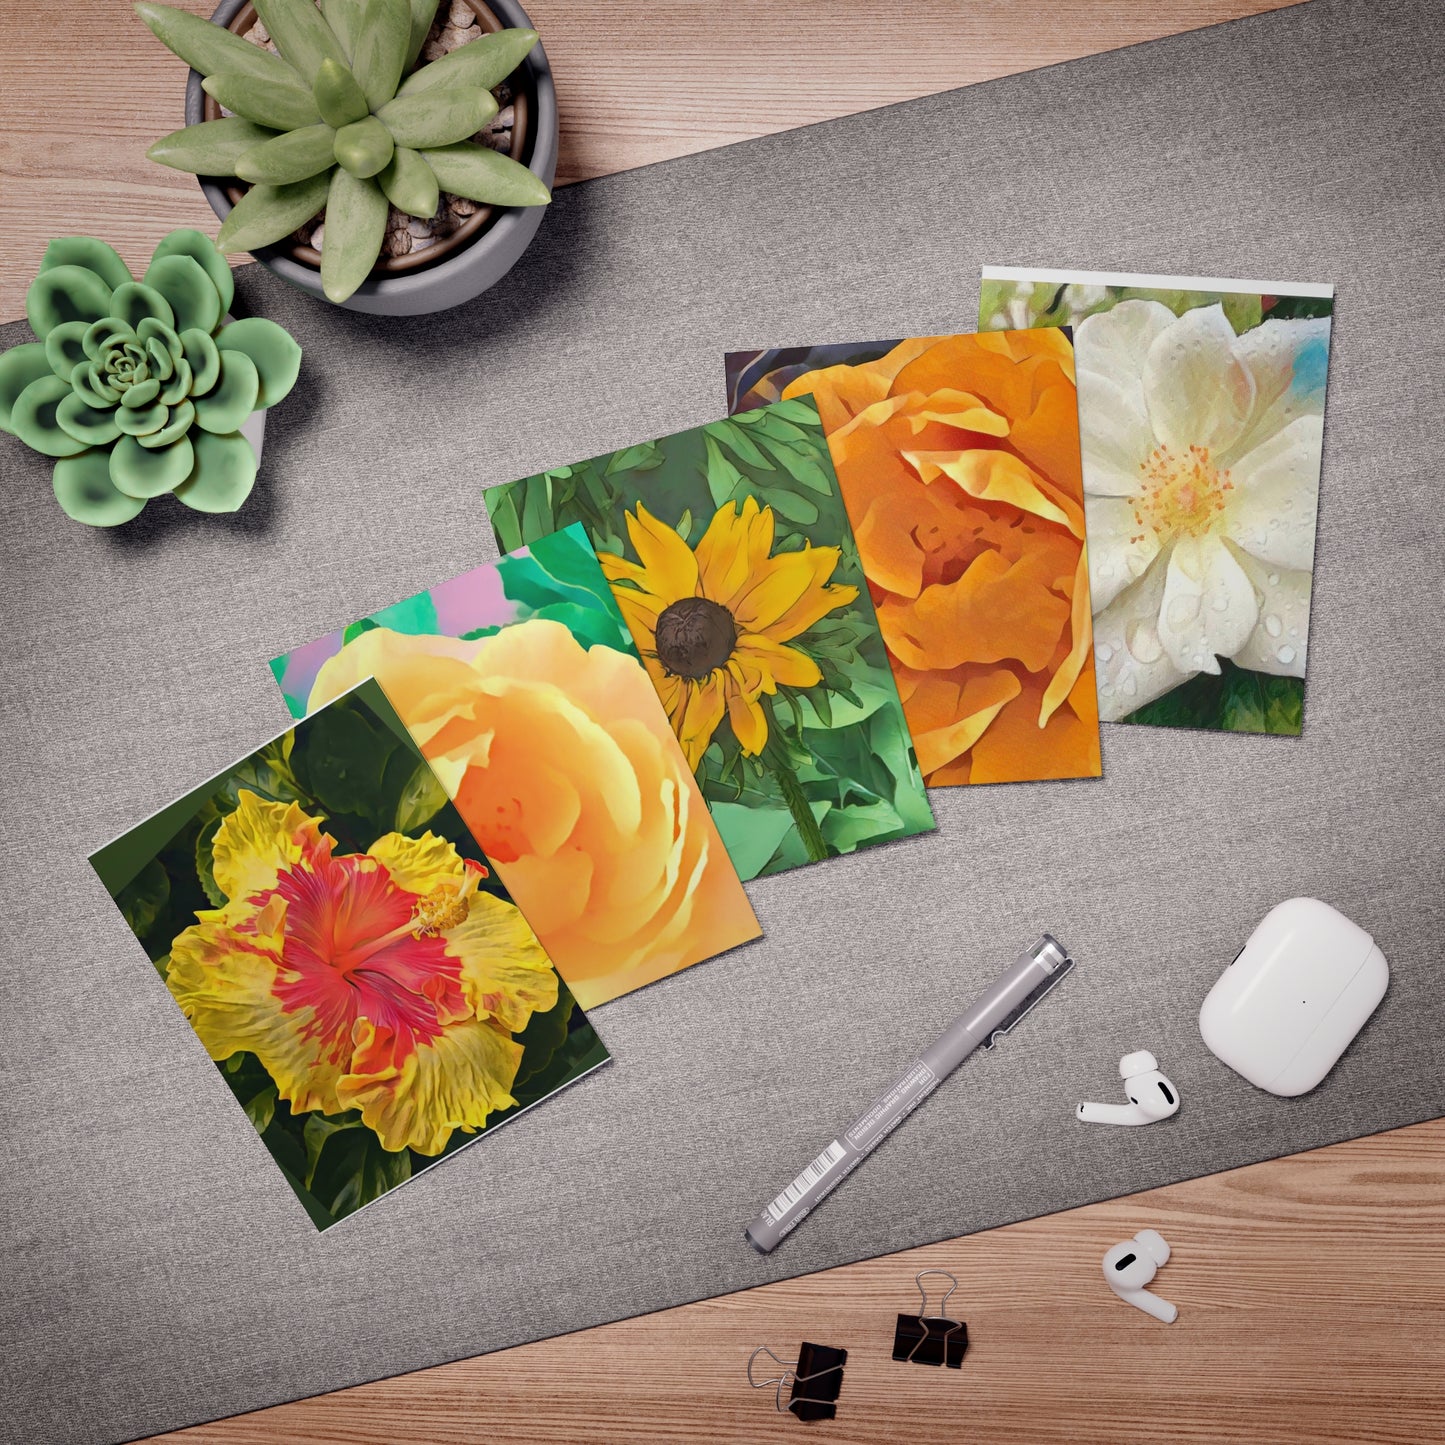 Cheerful Floral Notecards will Brighten Someone's Day!  Multi-Design Greeting Cards (5-Pack) - Blank inside